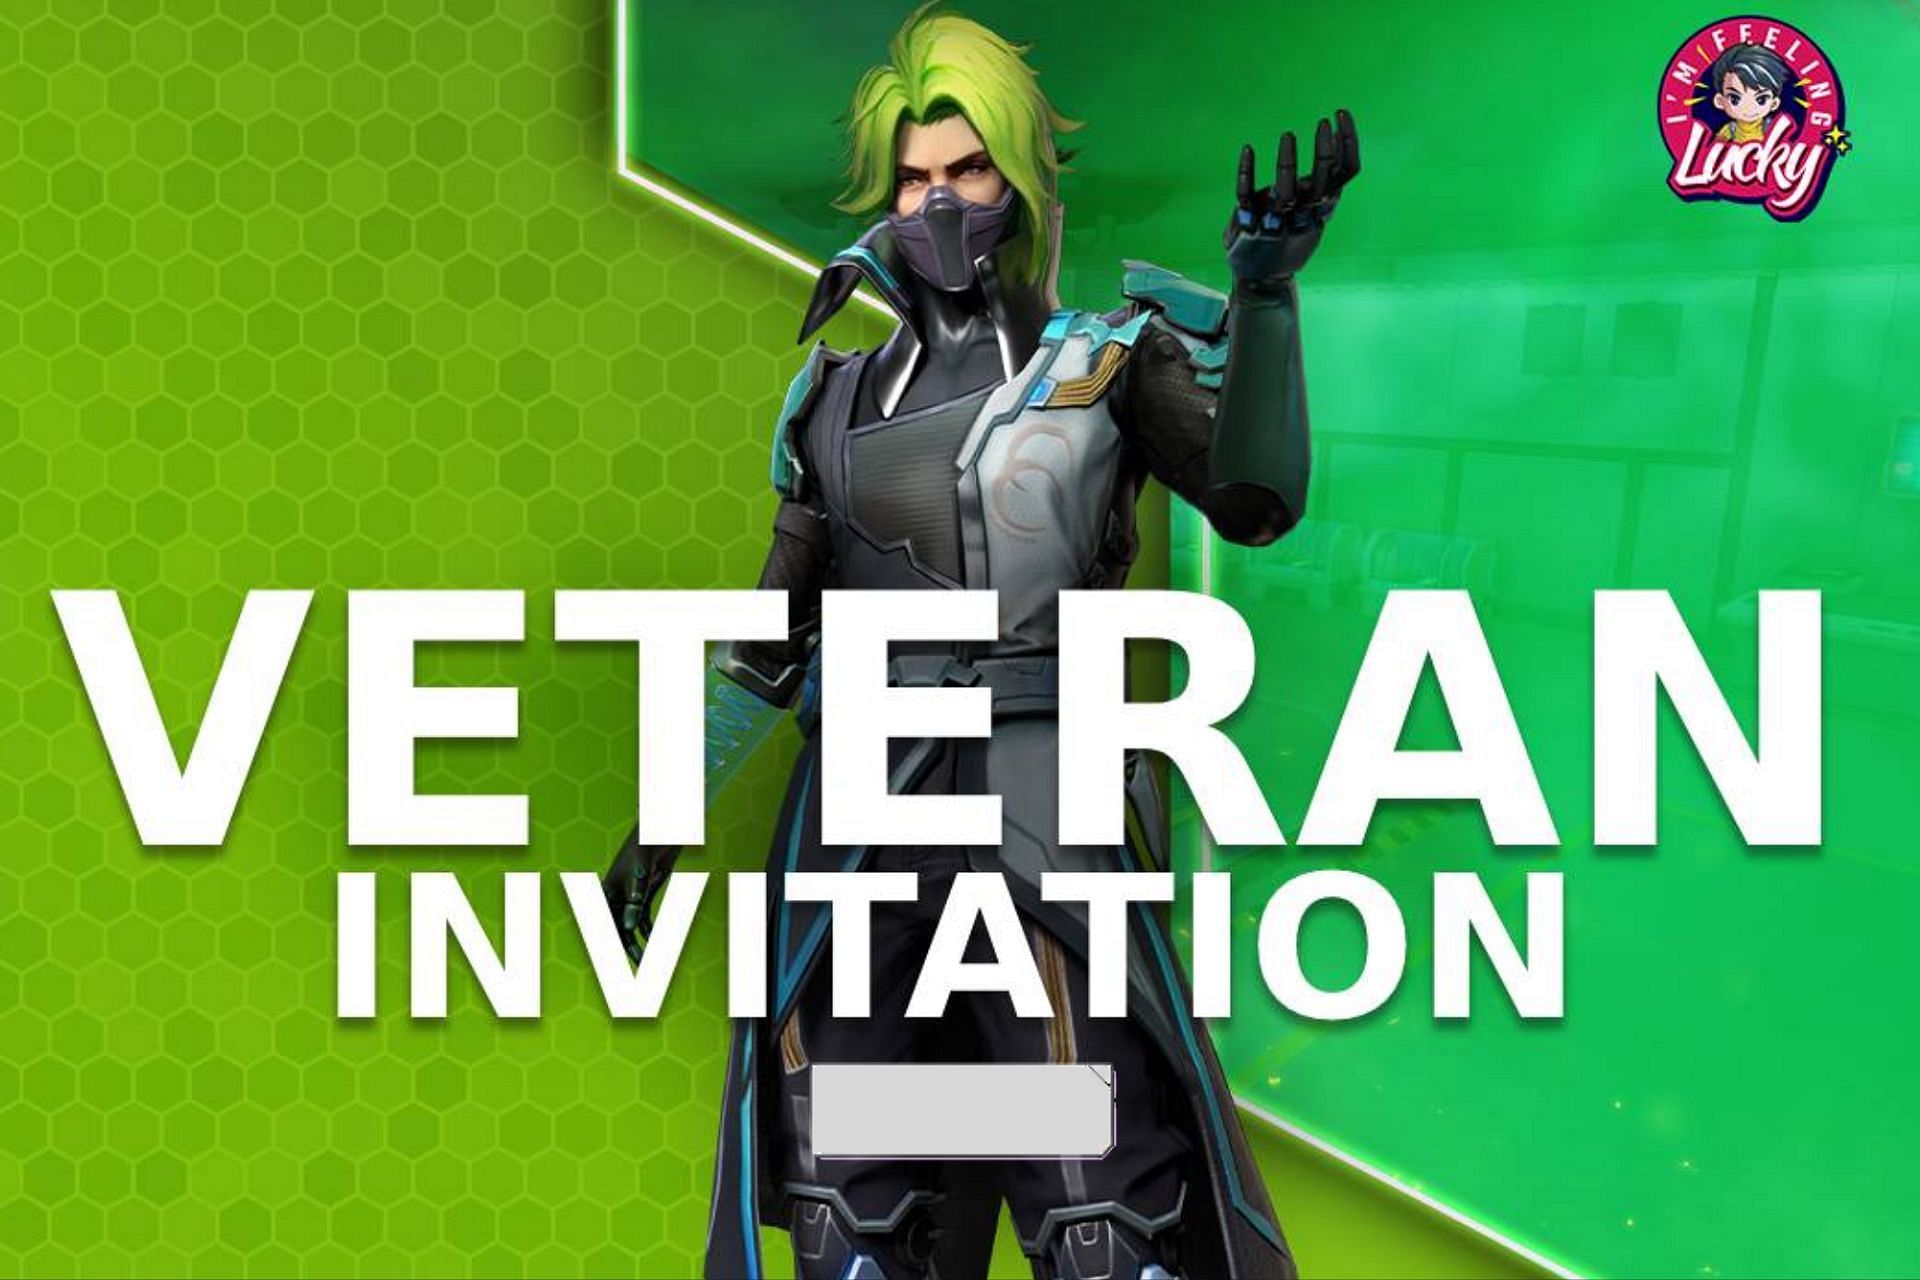 Veteran Invitation event is available in the game (Image via Garena)